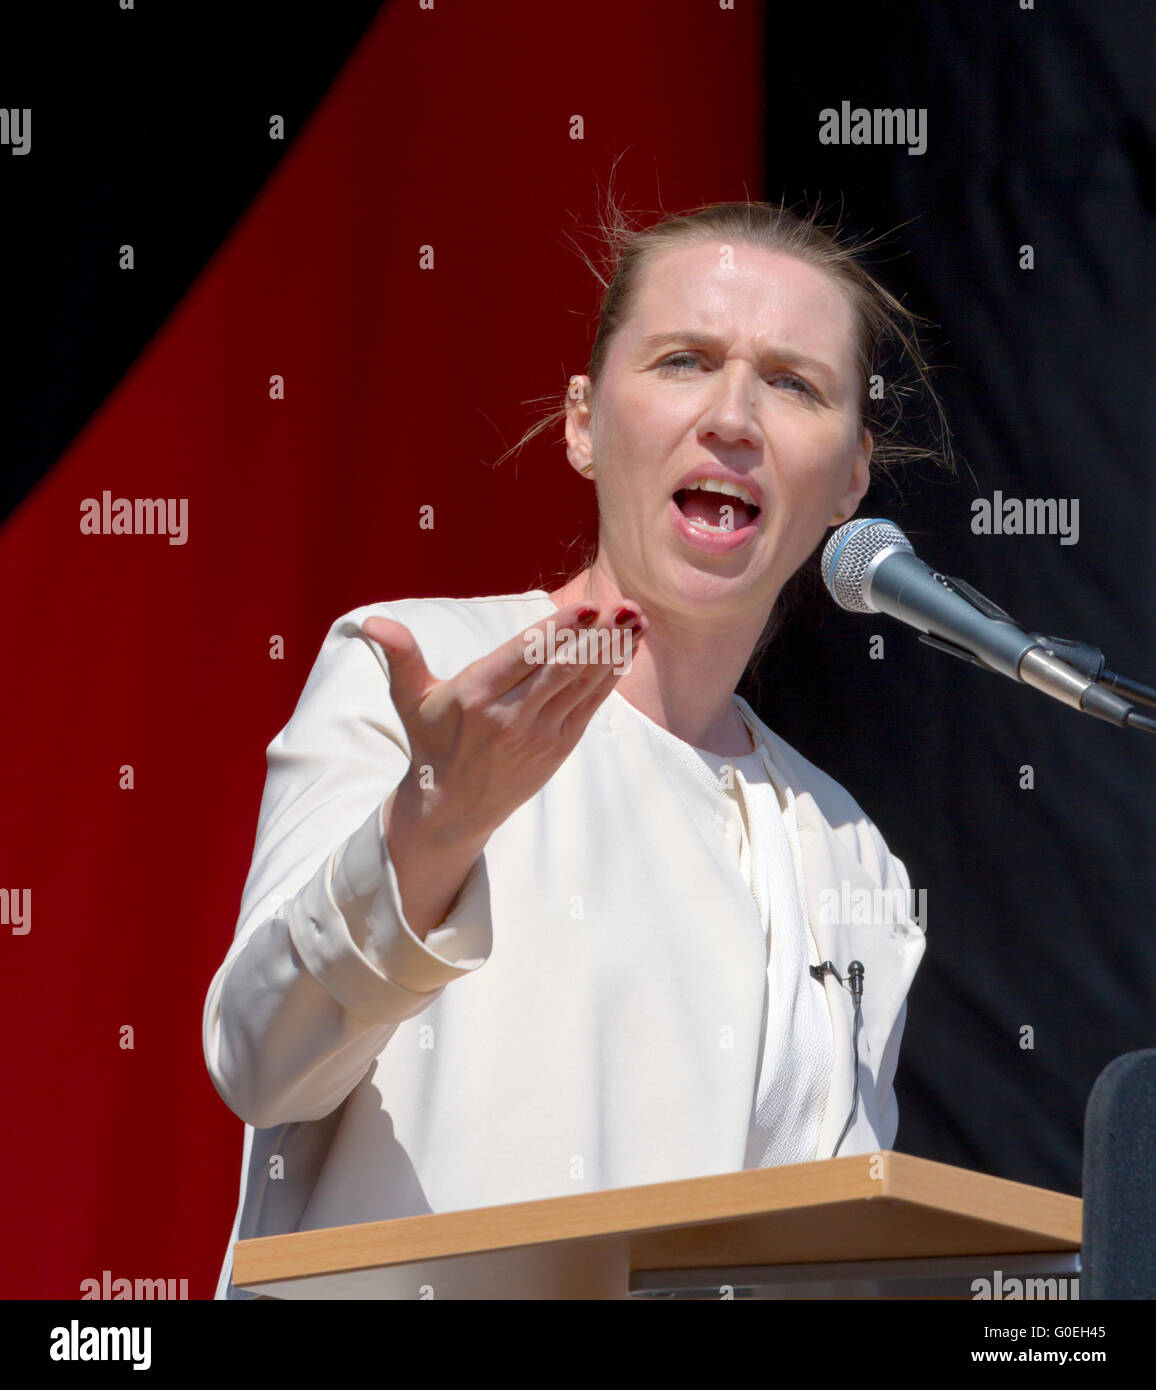 Copenhagen, Denmark, 1st May, 2016. Member of Parliament and leader of the largest party in the Danish parliament, The Social Democrats, Mette Frederiksen, delivered as the opposition leader a very popular speech  at The International Workers’ Day, Labour Day, in Faelledparken, the Copenhagen Common. A popular campaign and festival day full of political speeches and entertainment. Credit:  Niels Quist/Alamy Live News Stock Photo